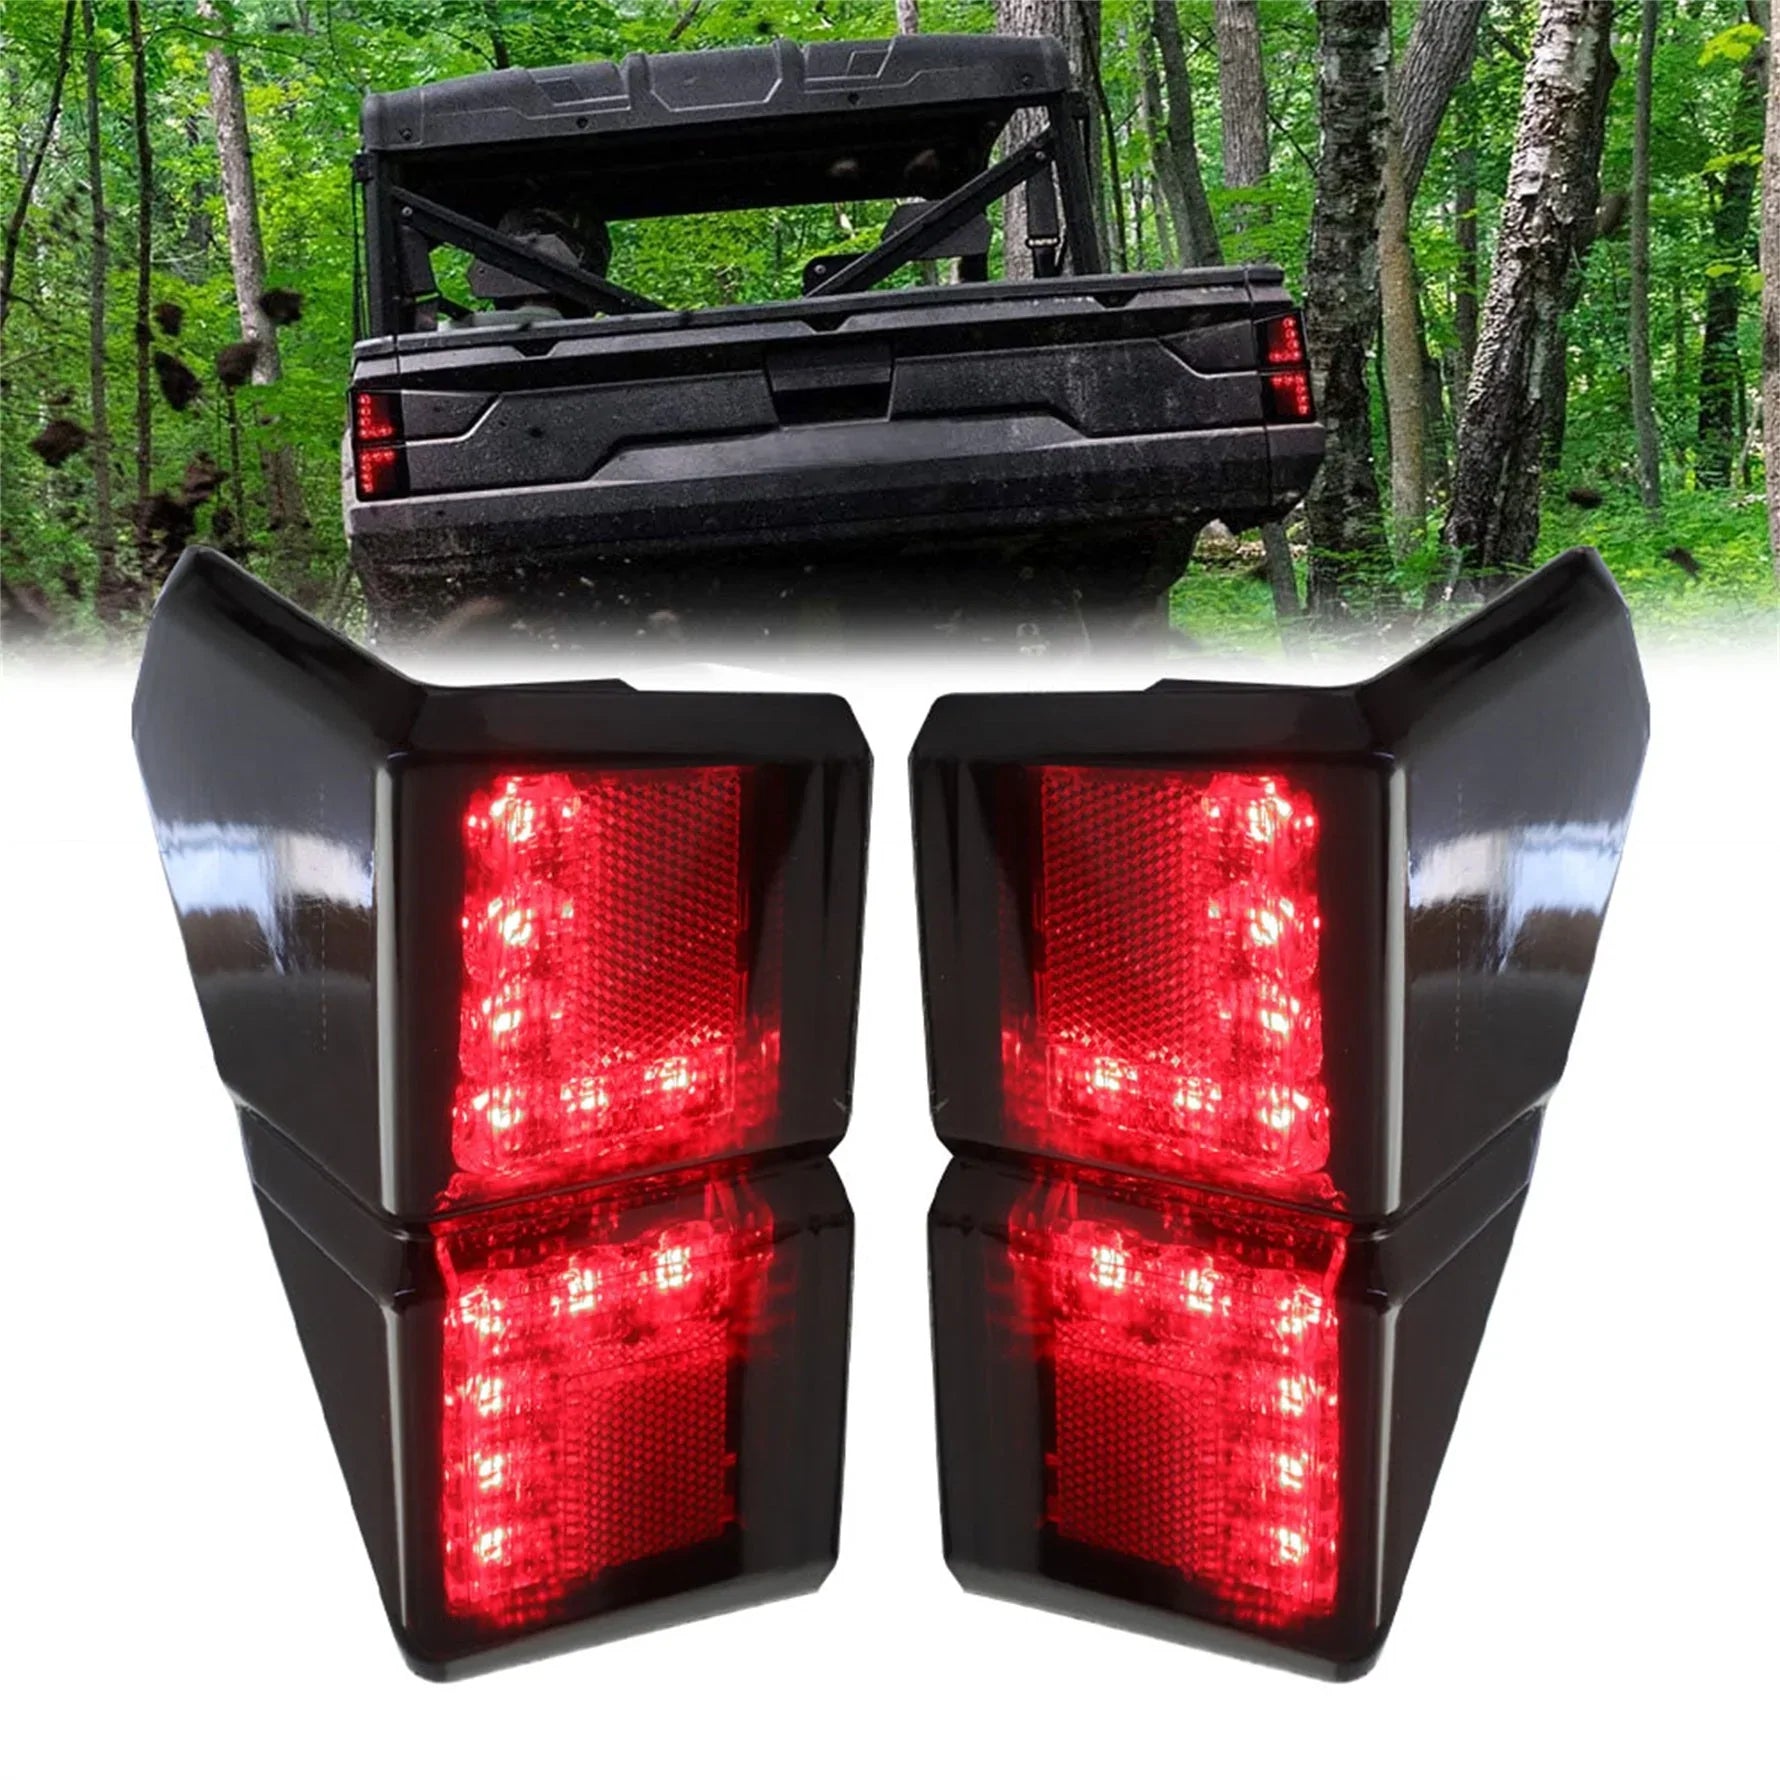 Labwork Left+Right Rear Tail Light Replacement for Polaris Ranger 1000 XP CREW 2413766 2018-2021 LAB WORK MOTO